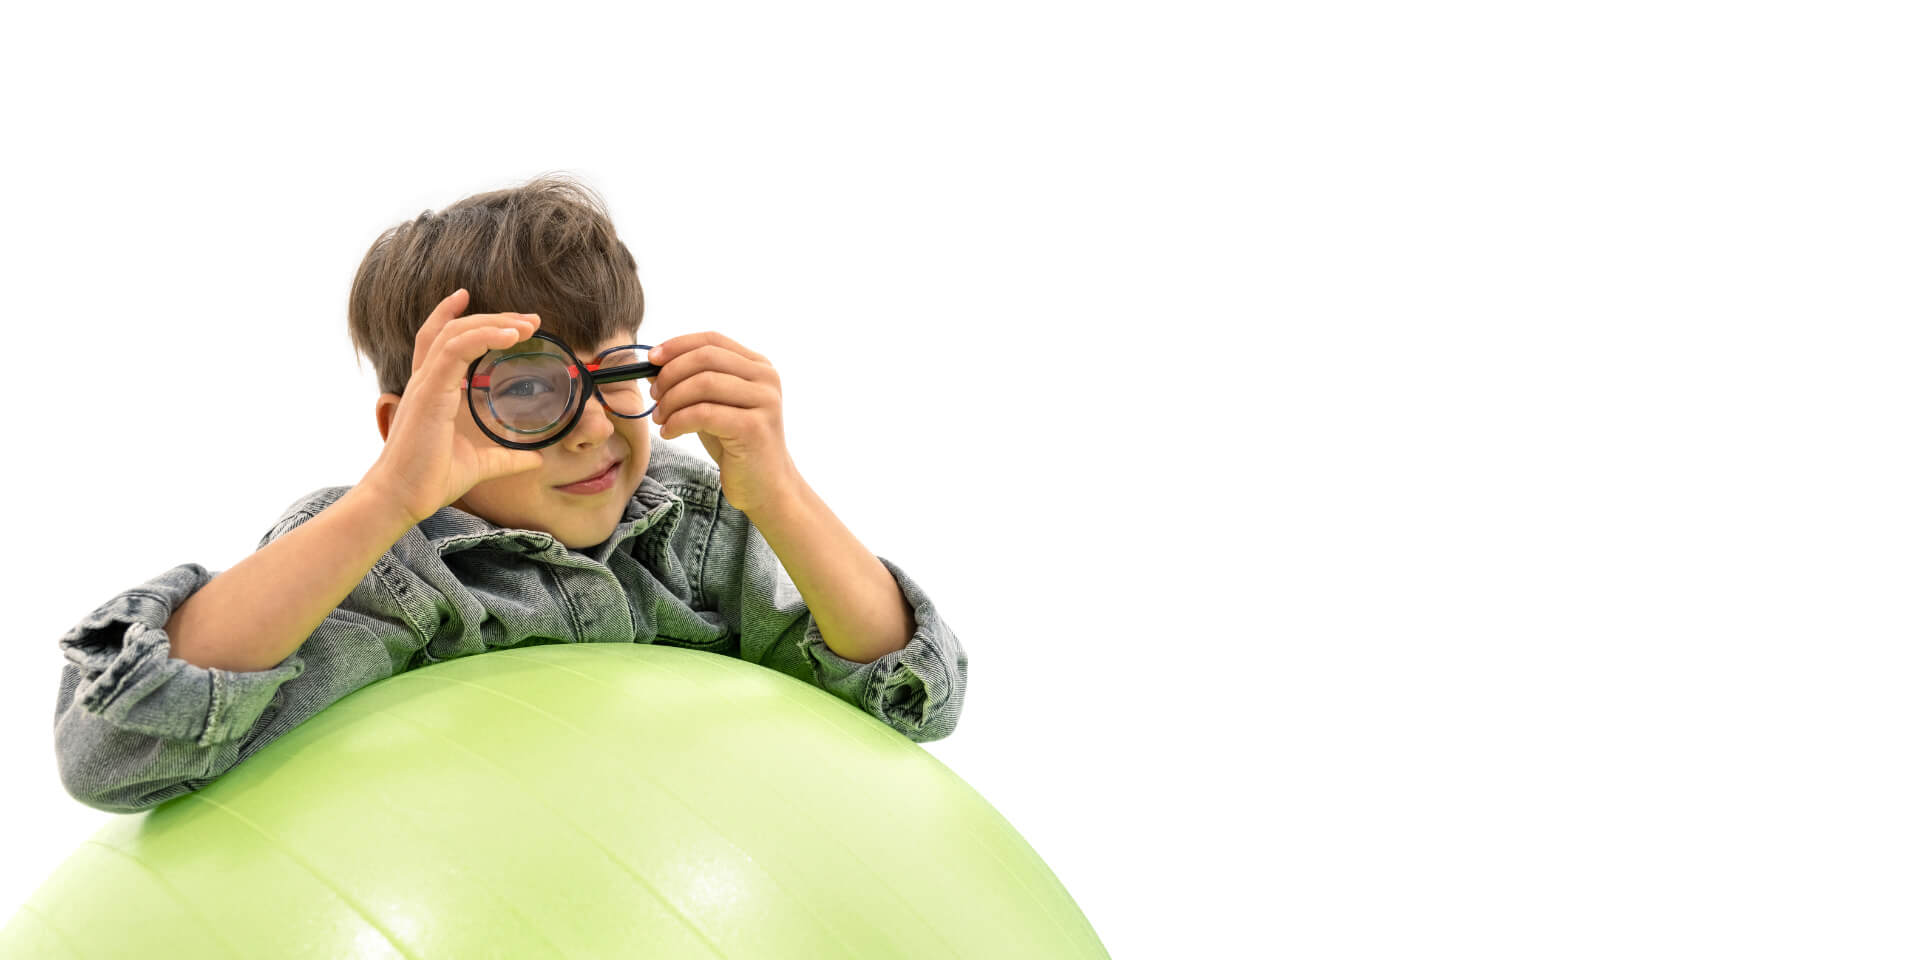 A boy wearing ZEISS Myopia Management lenses leaning on a gymnastic ball and holding a magnifying glass in front of one eye.